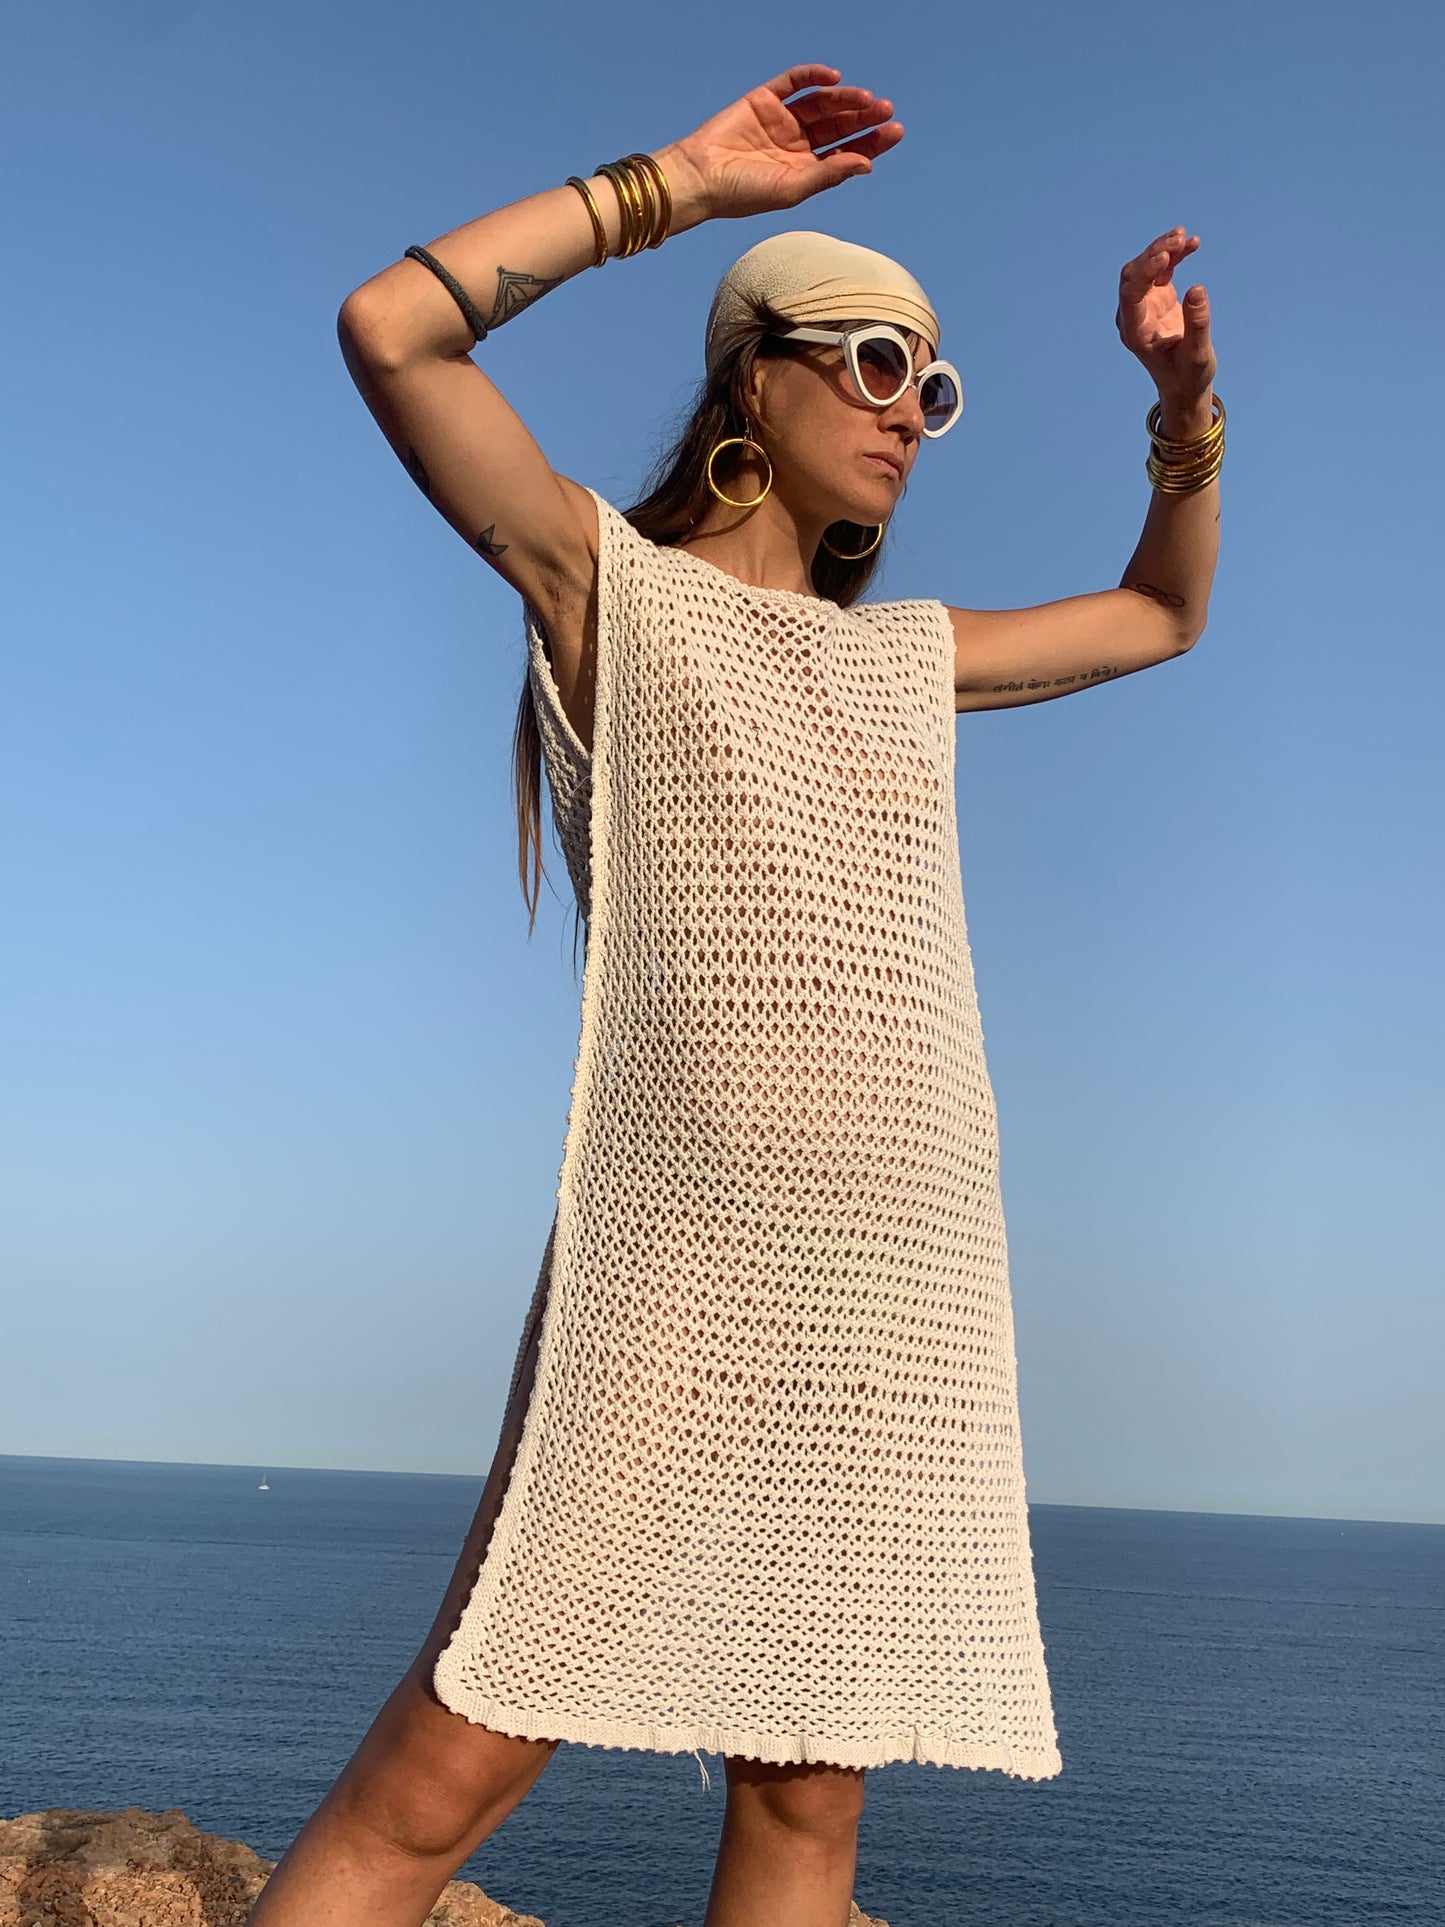 Vintage lace crochet textiles up-cycled dress by Vagabond Ibiza